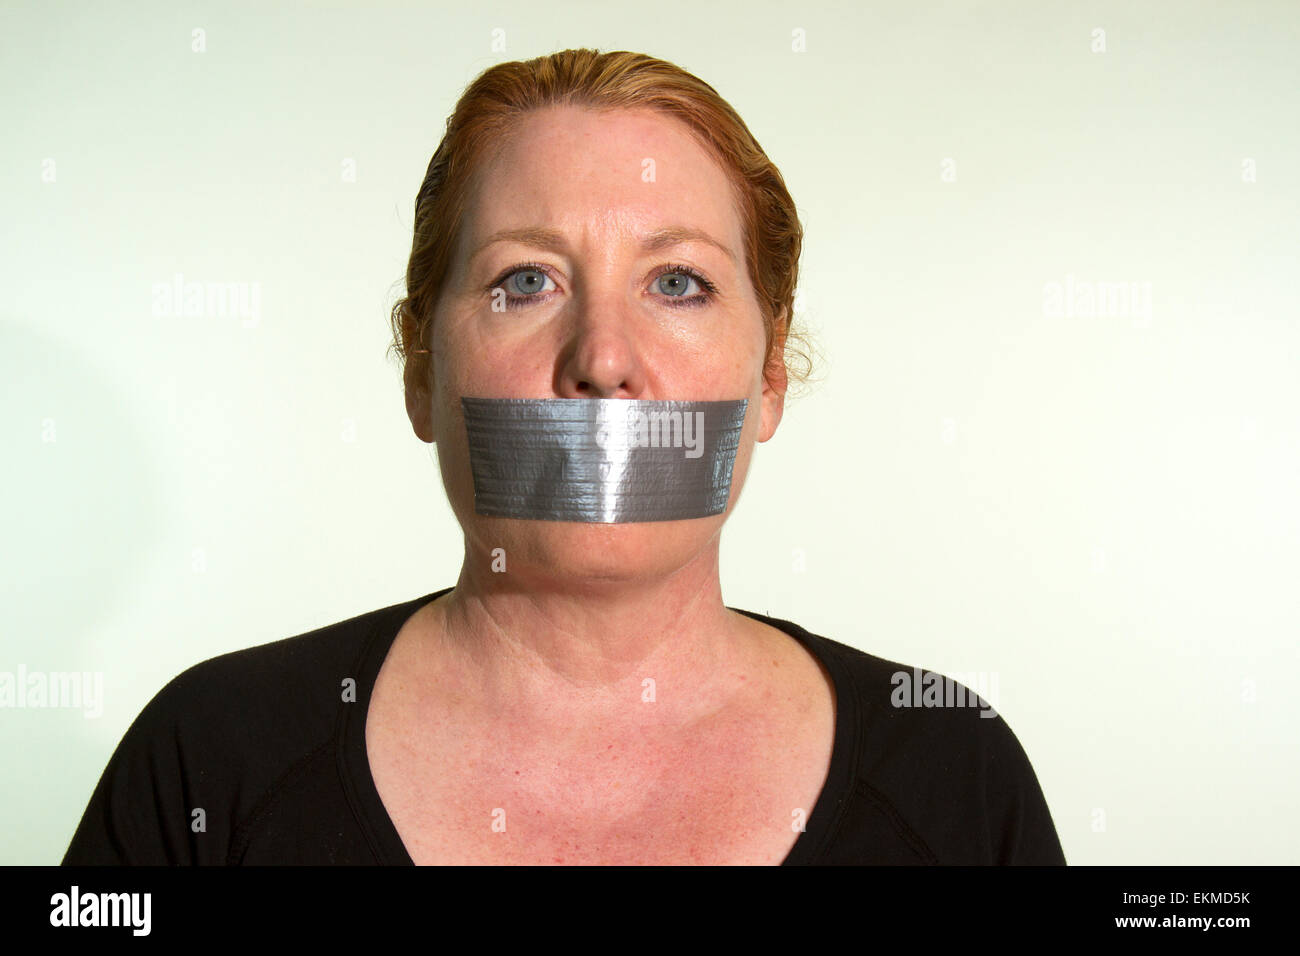 Censorship of  expression expressed by a woman with duct tape over her mouth Stock Photo